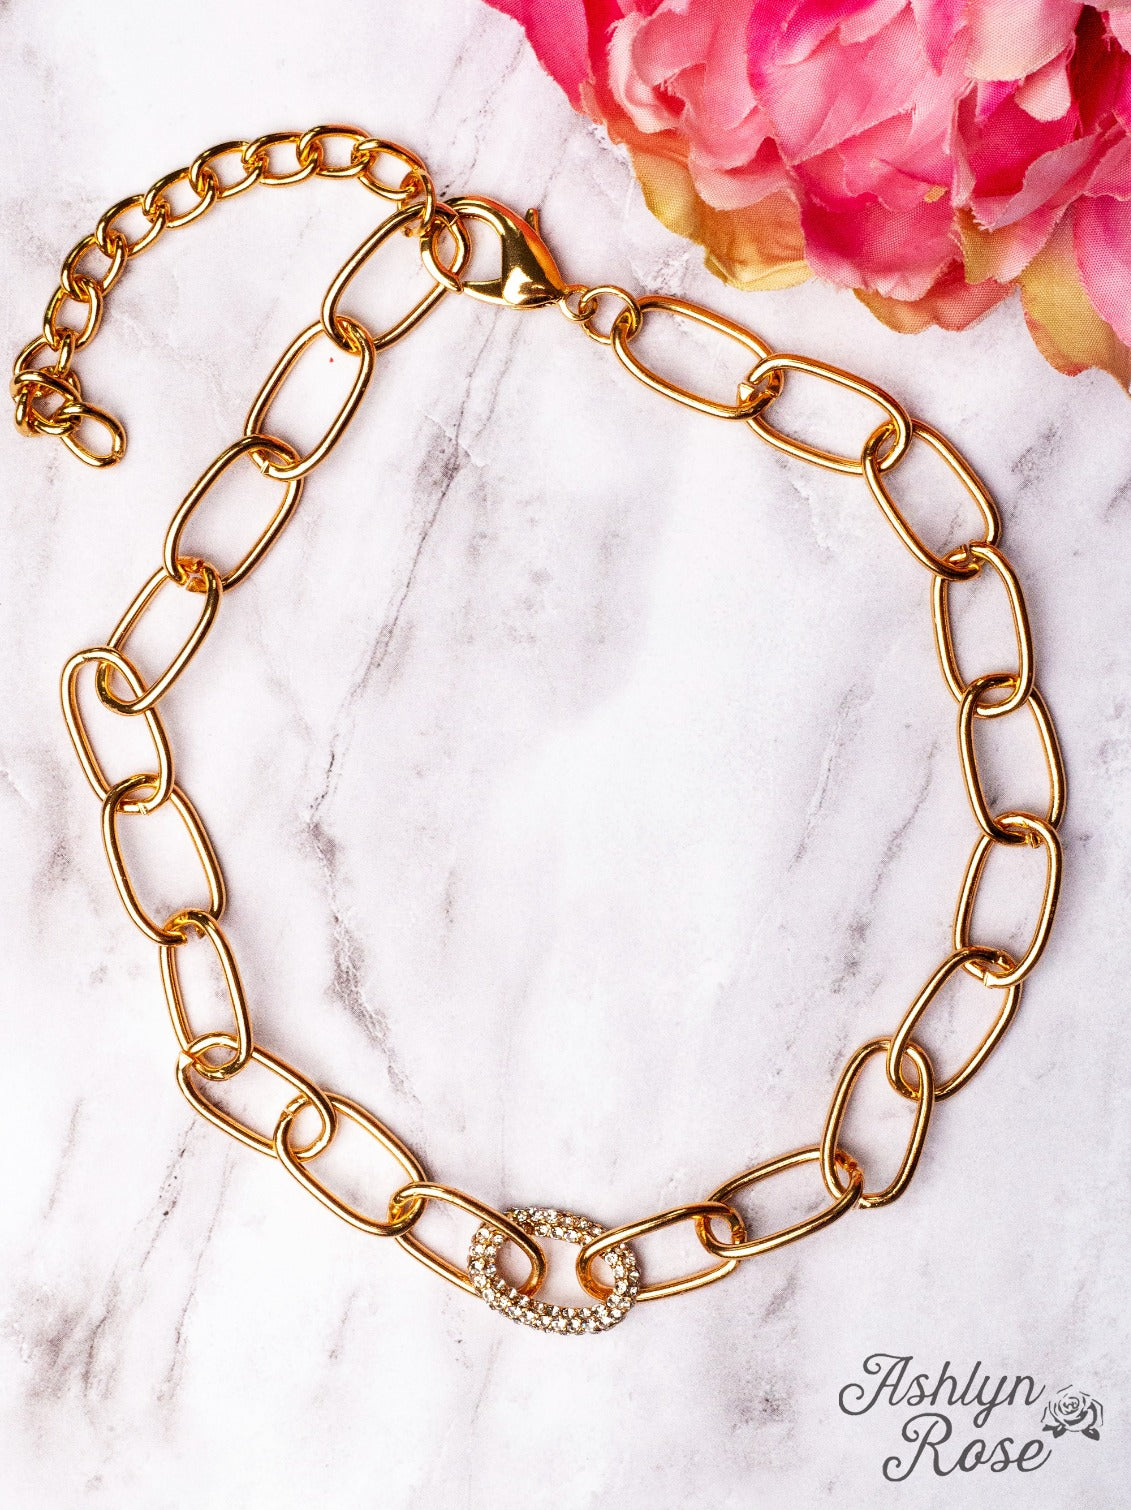 CALIFORNIA DREAMIN' GOLD PAPERCLIP CHAIN NECKLACE